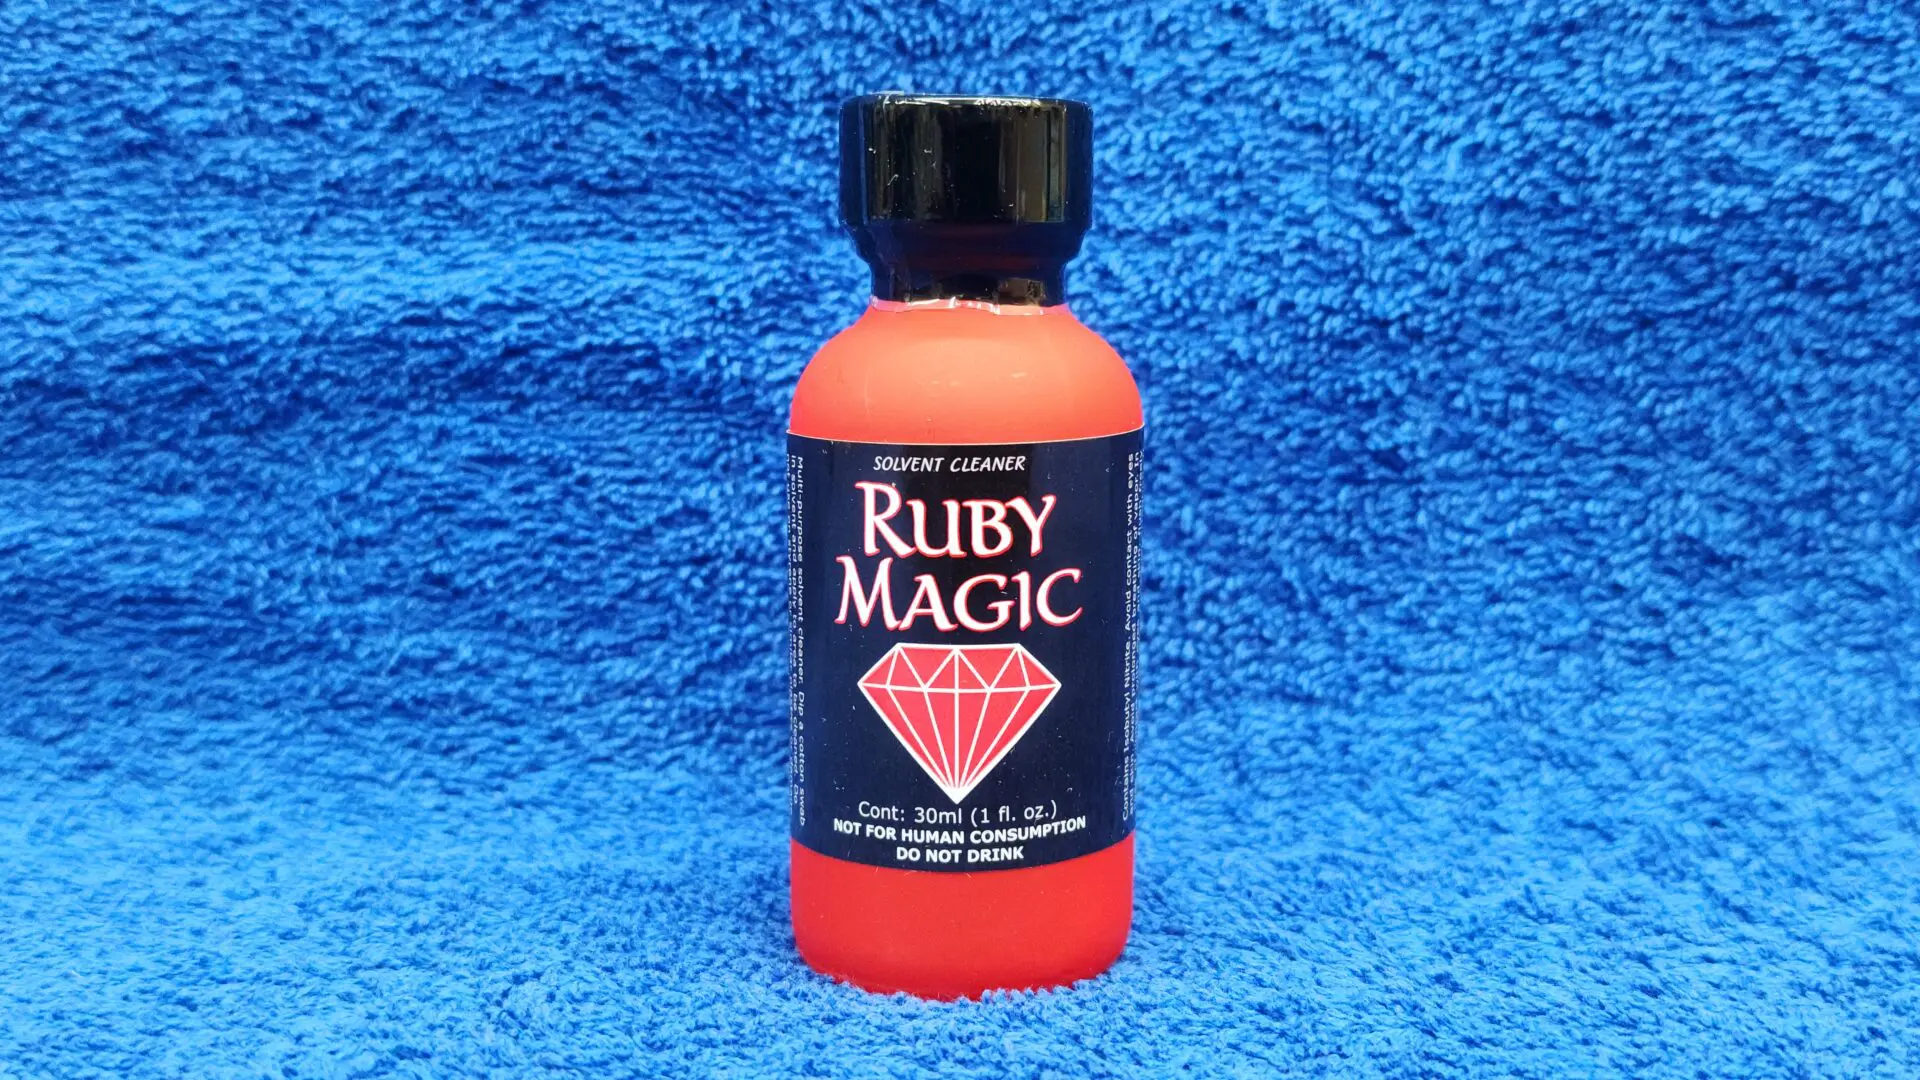 A bottle of Ruby Magic beverage on a blue textured background.